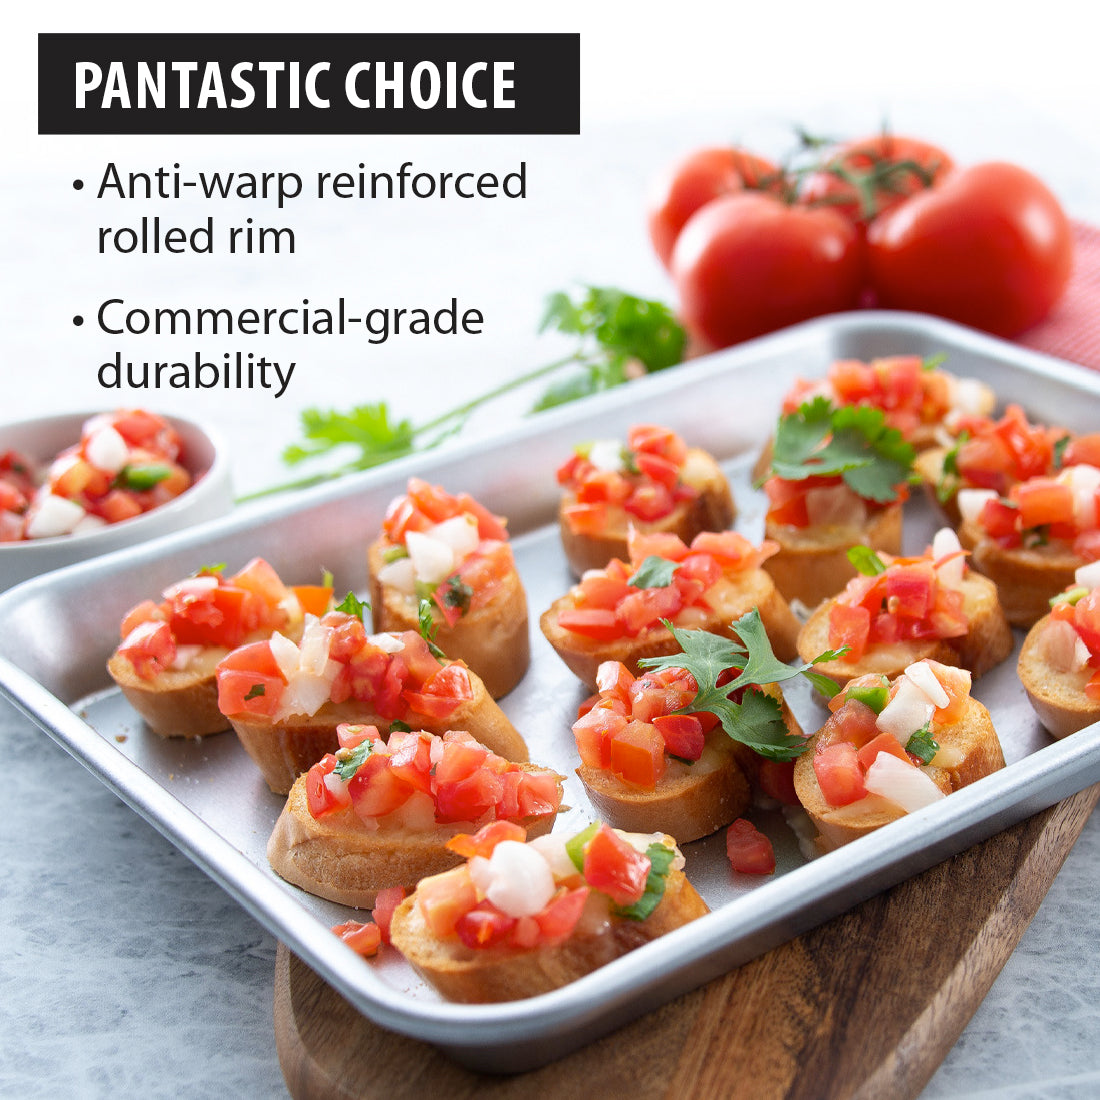 Quarter Sheet Pan filled with bruschetta on cutting board with tomatoes and basil.